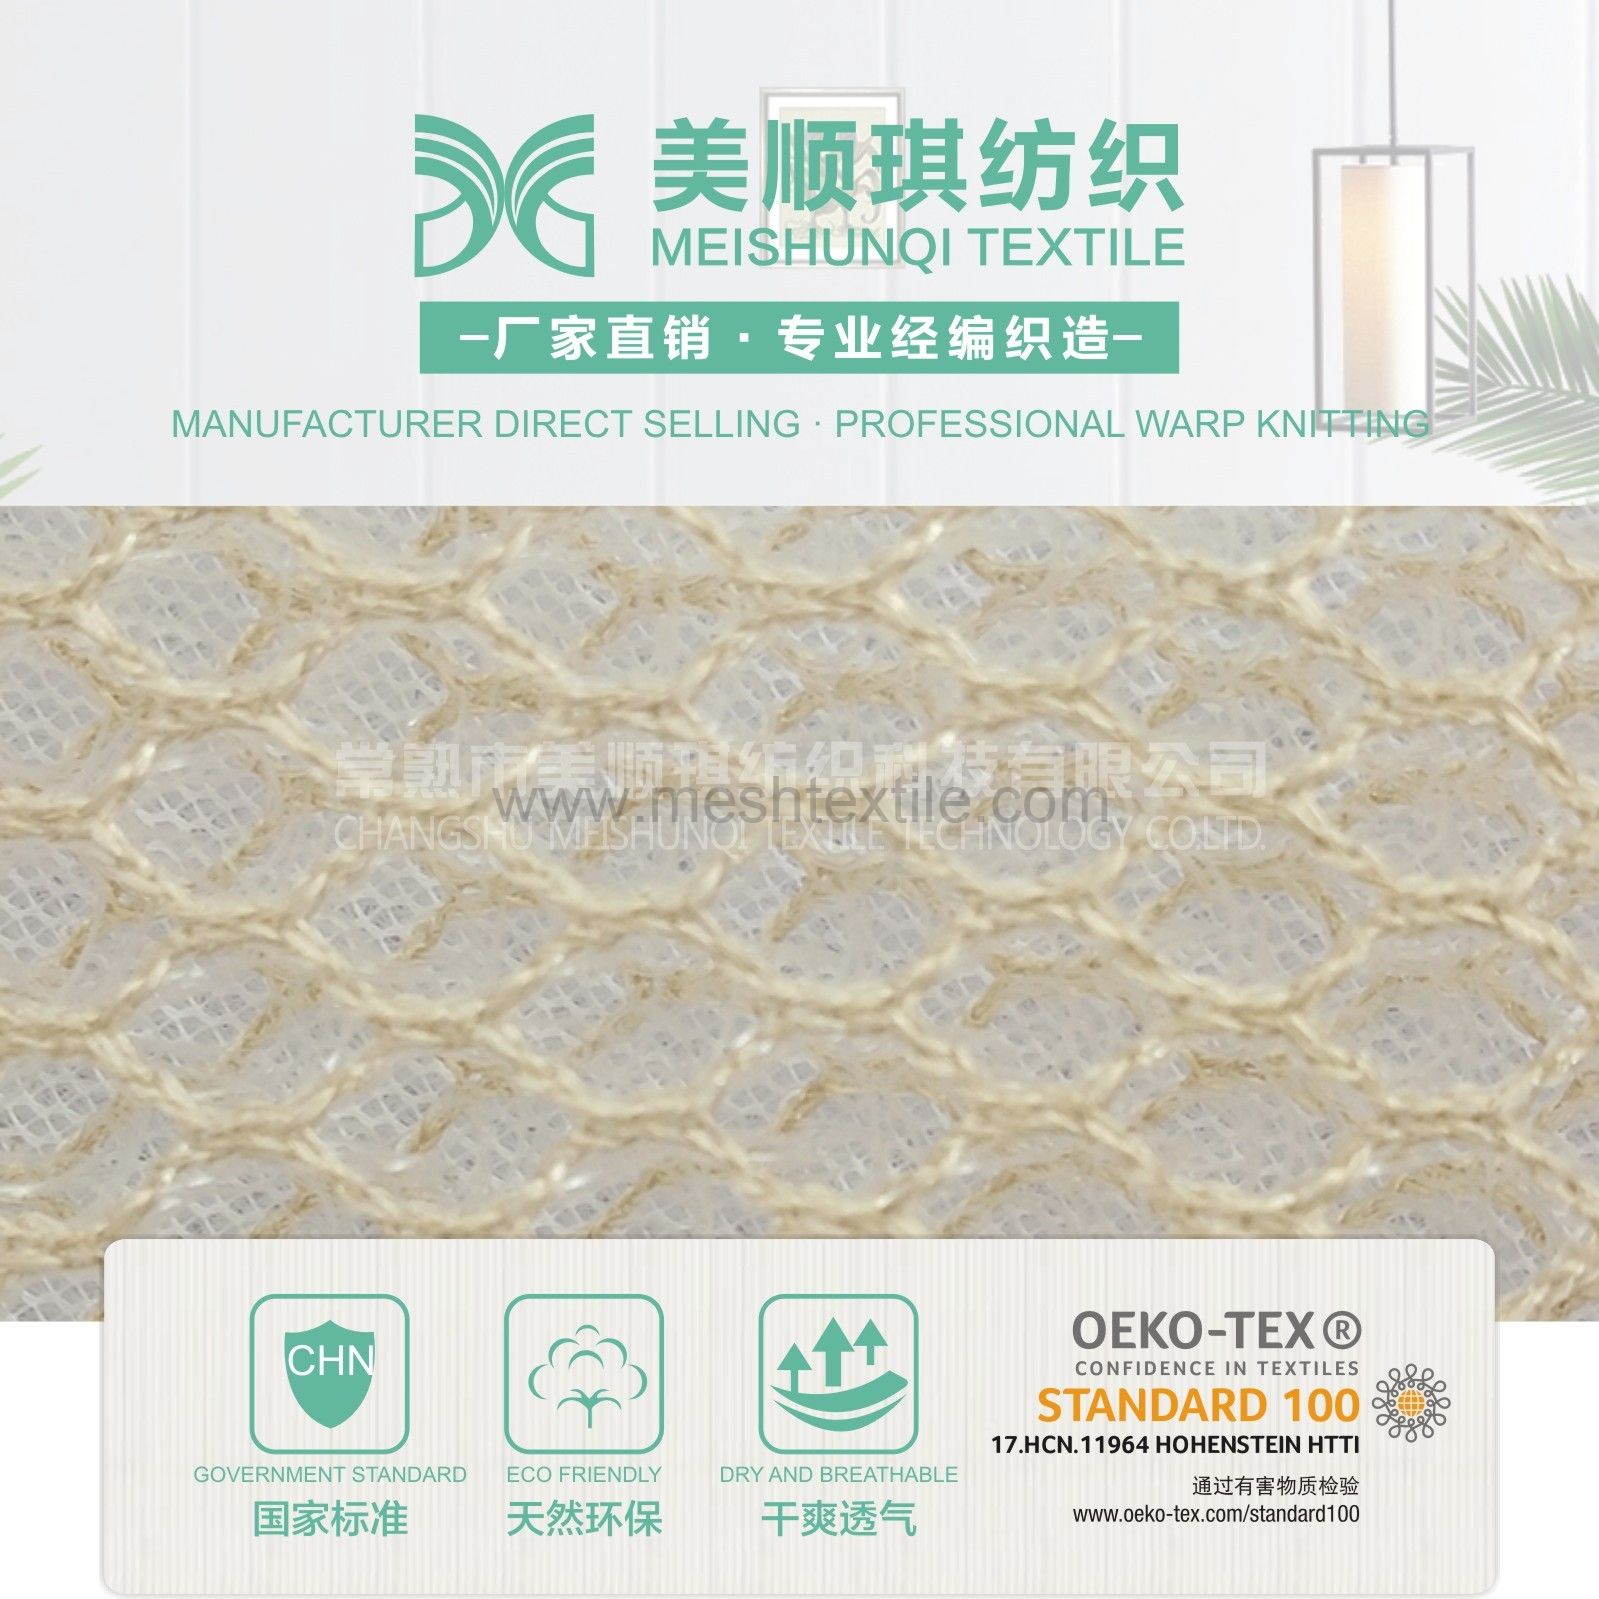 Air purification filter and humidifier filter material